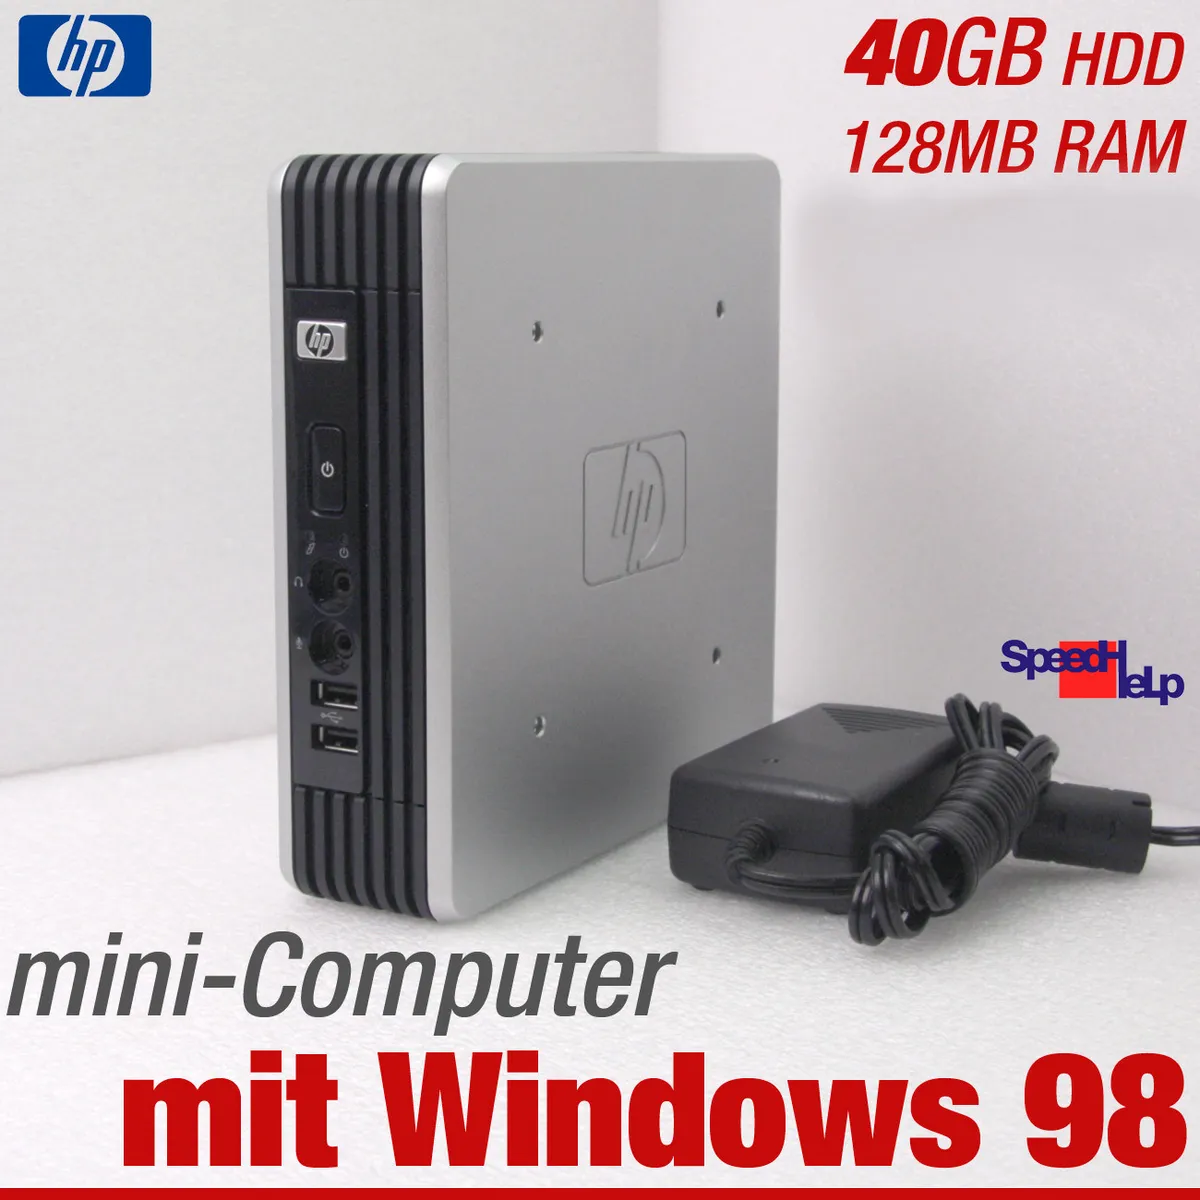 HP Mini Computer PC For Windows 98 Old Dos Games 400MHZ 40GB HDD